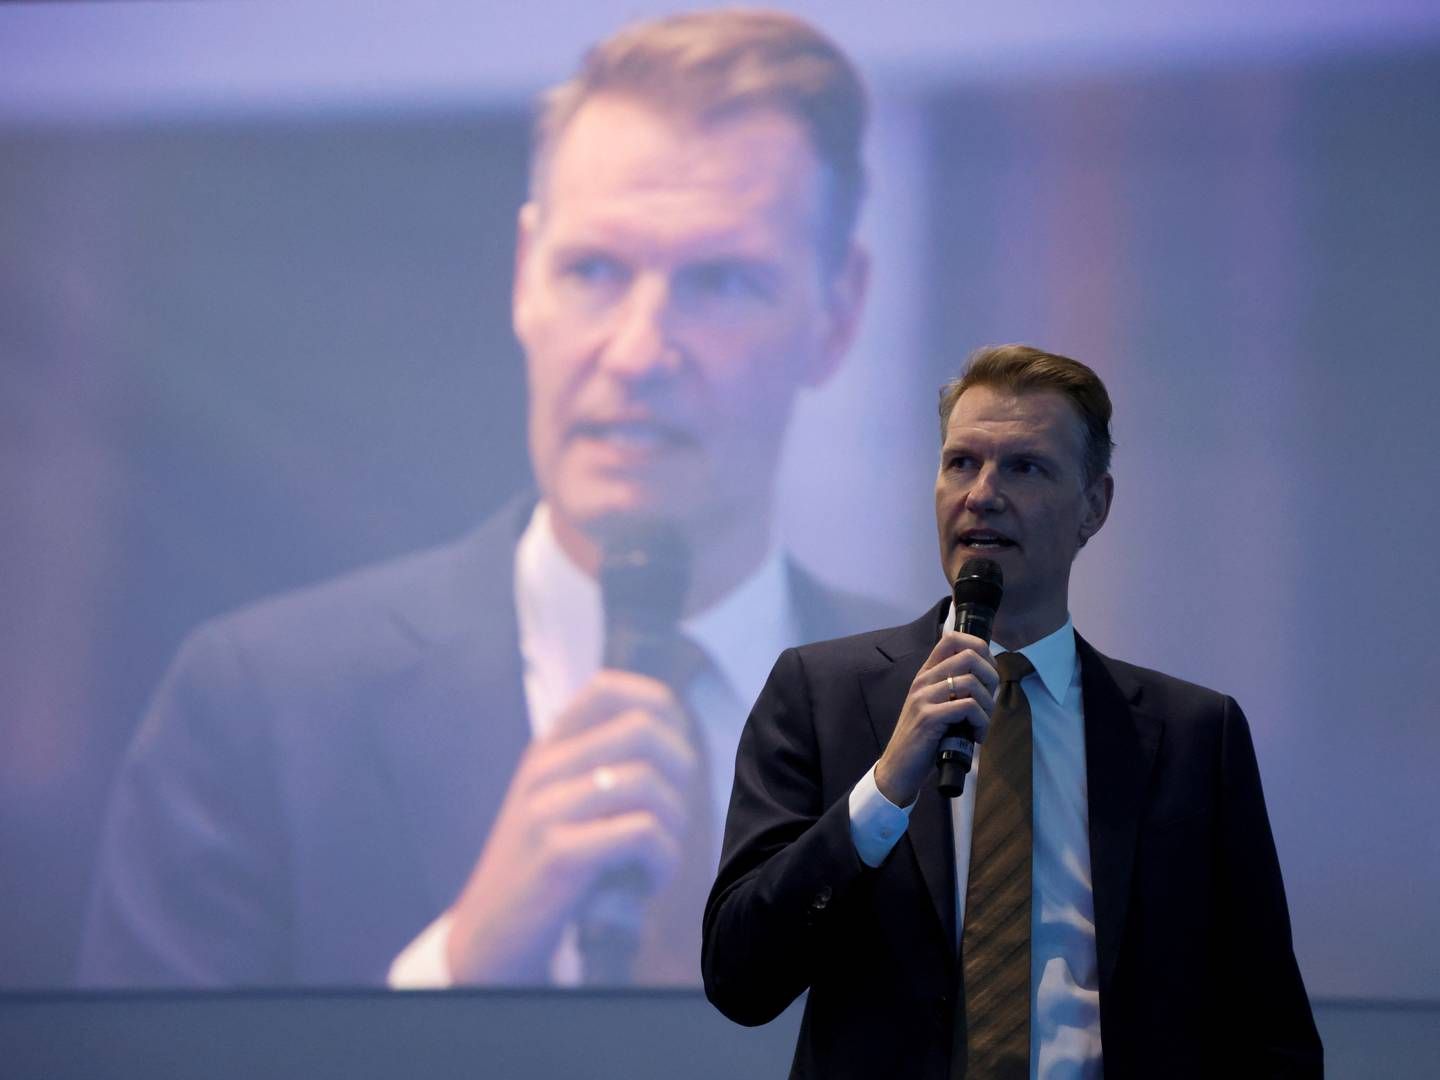 MSC's CEO Søren Toft summarizes the first quarter by saying that "all in all, we have a positive outlook."